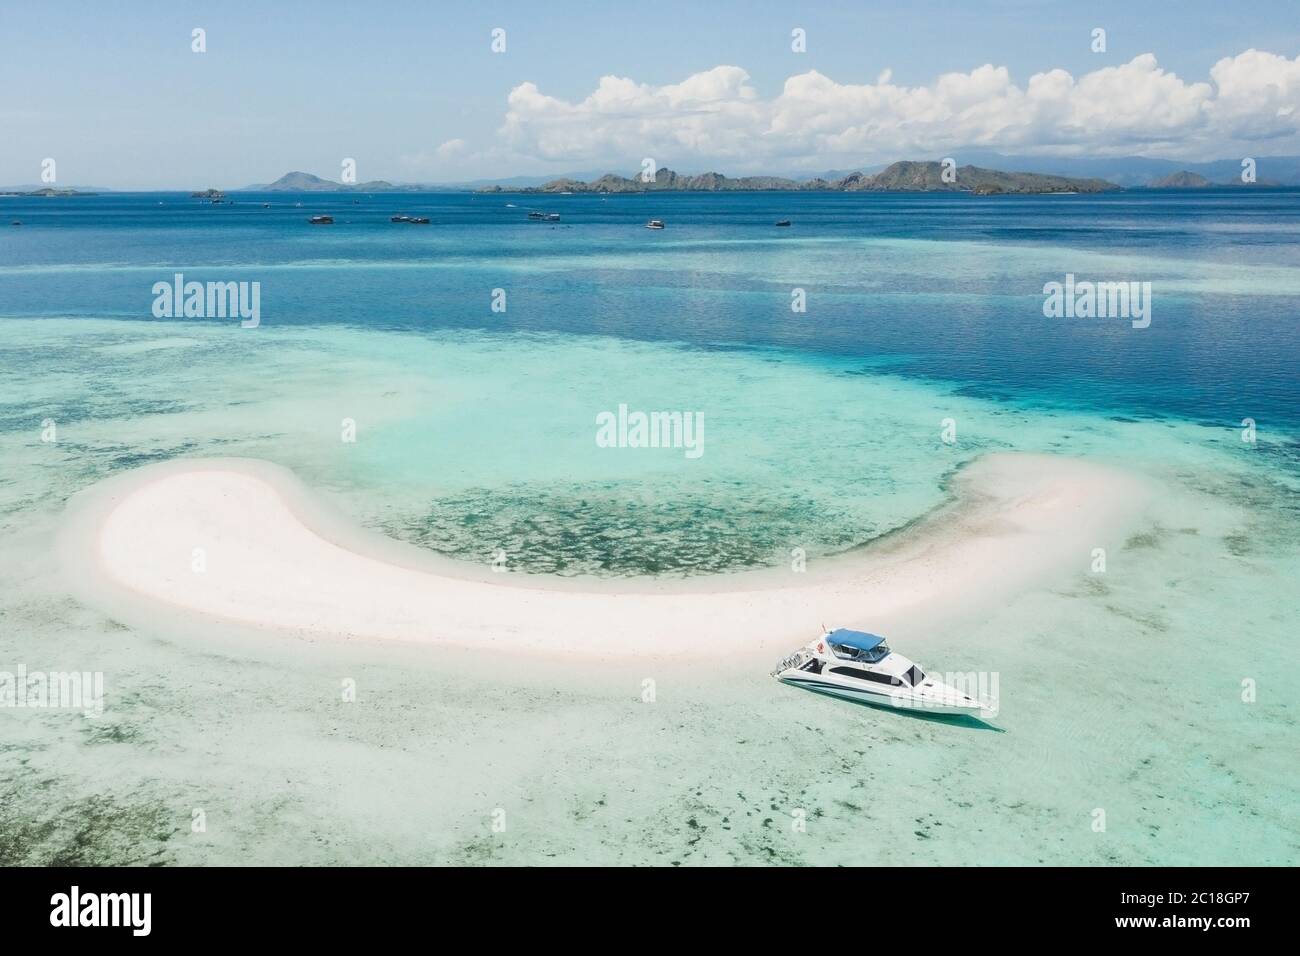 Aerial view of Taka Makassar island in Komodo national park, Indonesia. Empty paradise small white sand island on coral reef. Luxury boat near beach. Stock Photo